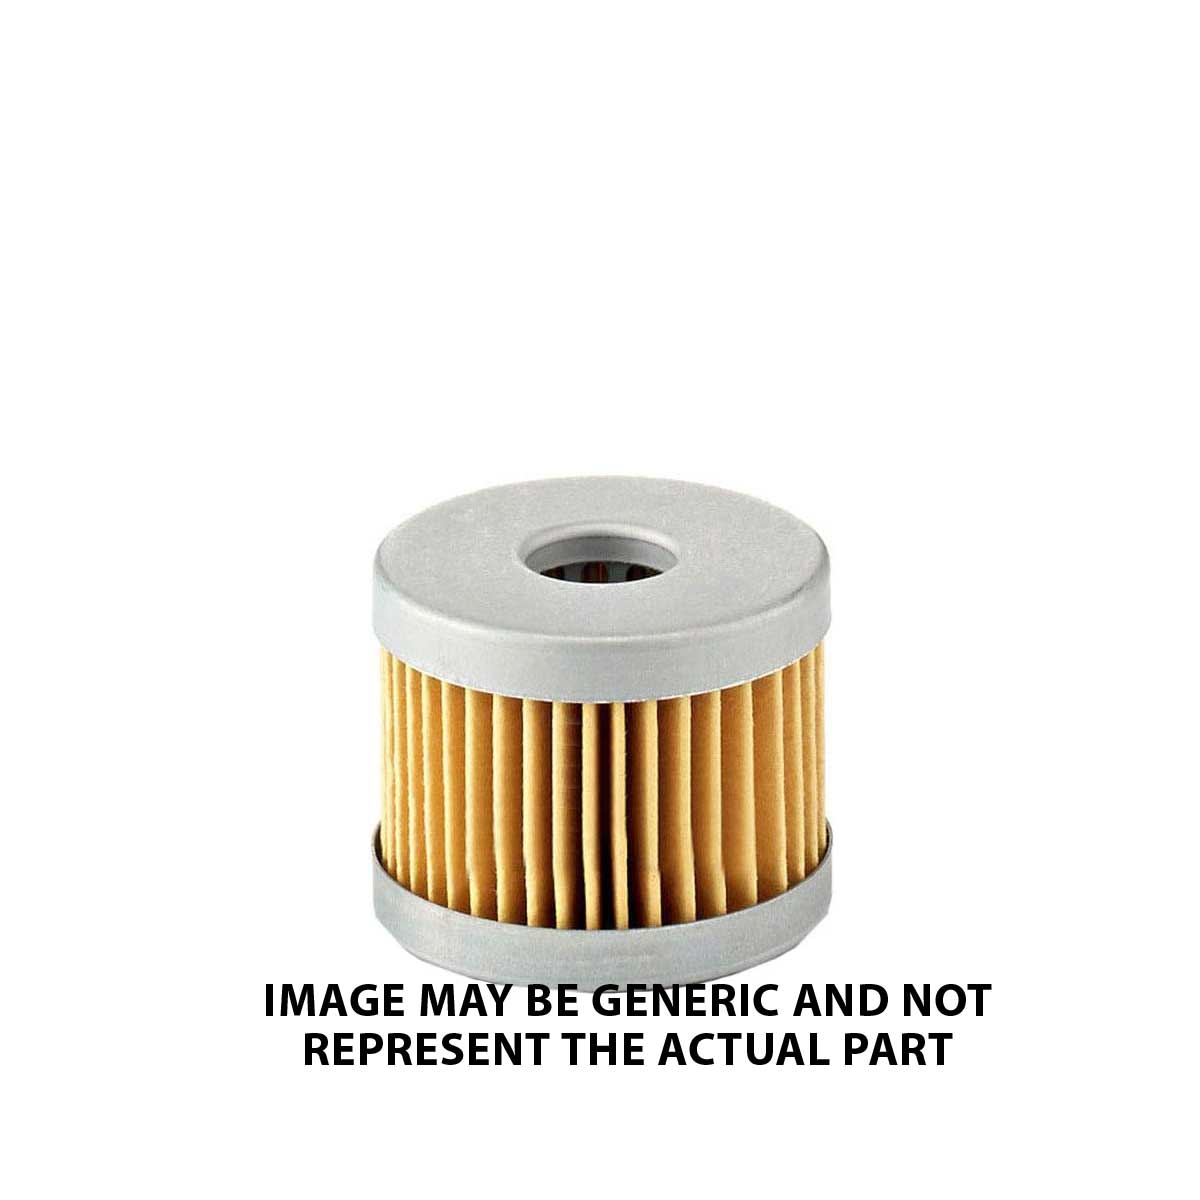 Rietschle Replacement Air Filter Part 730524